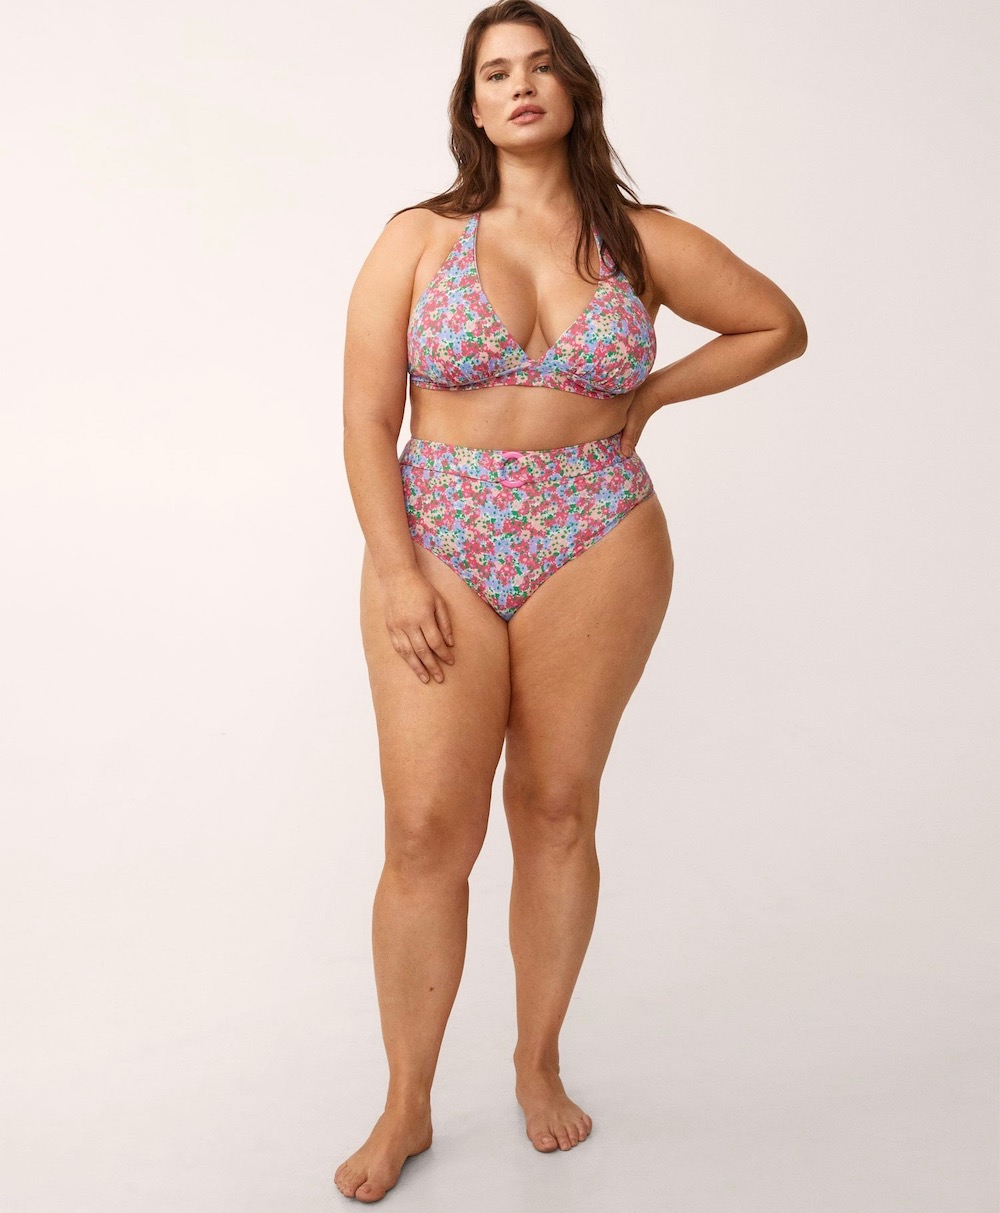 Great swimsuits for big bust